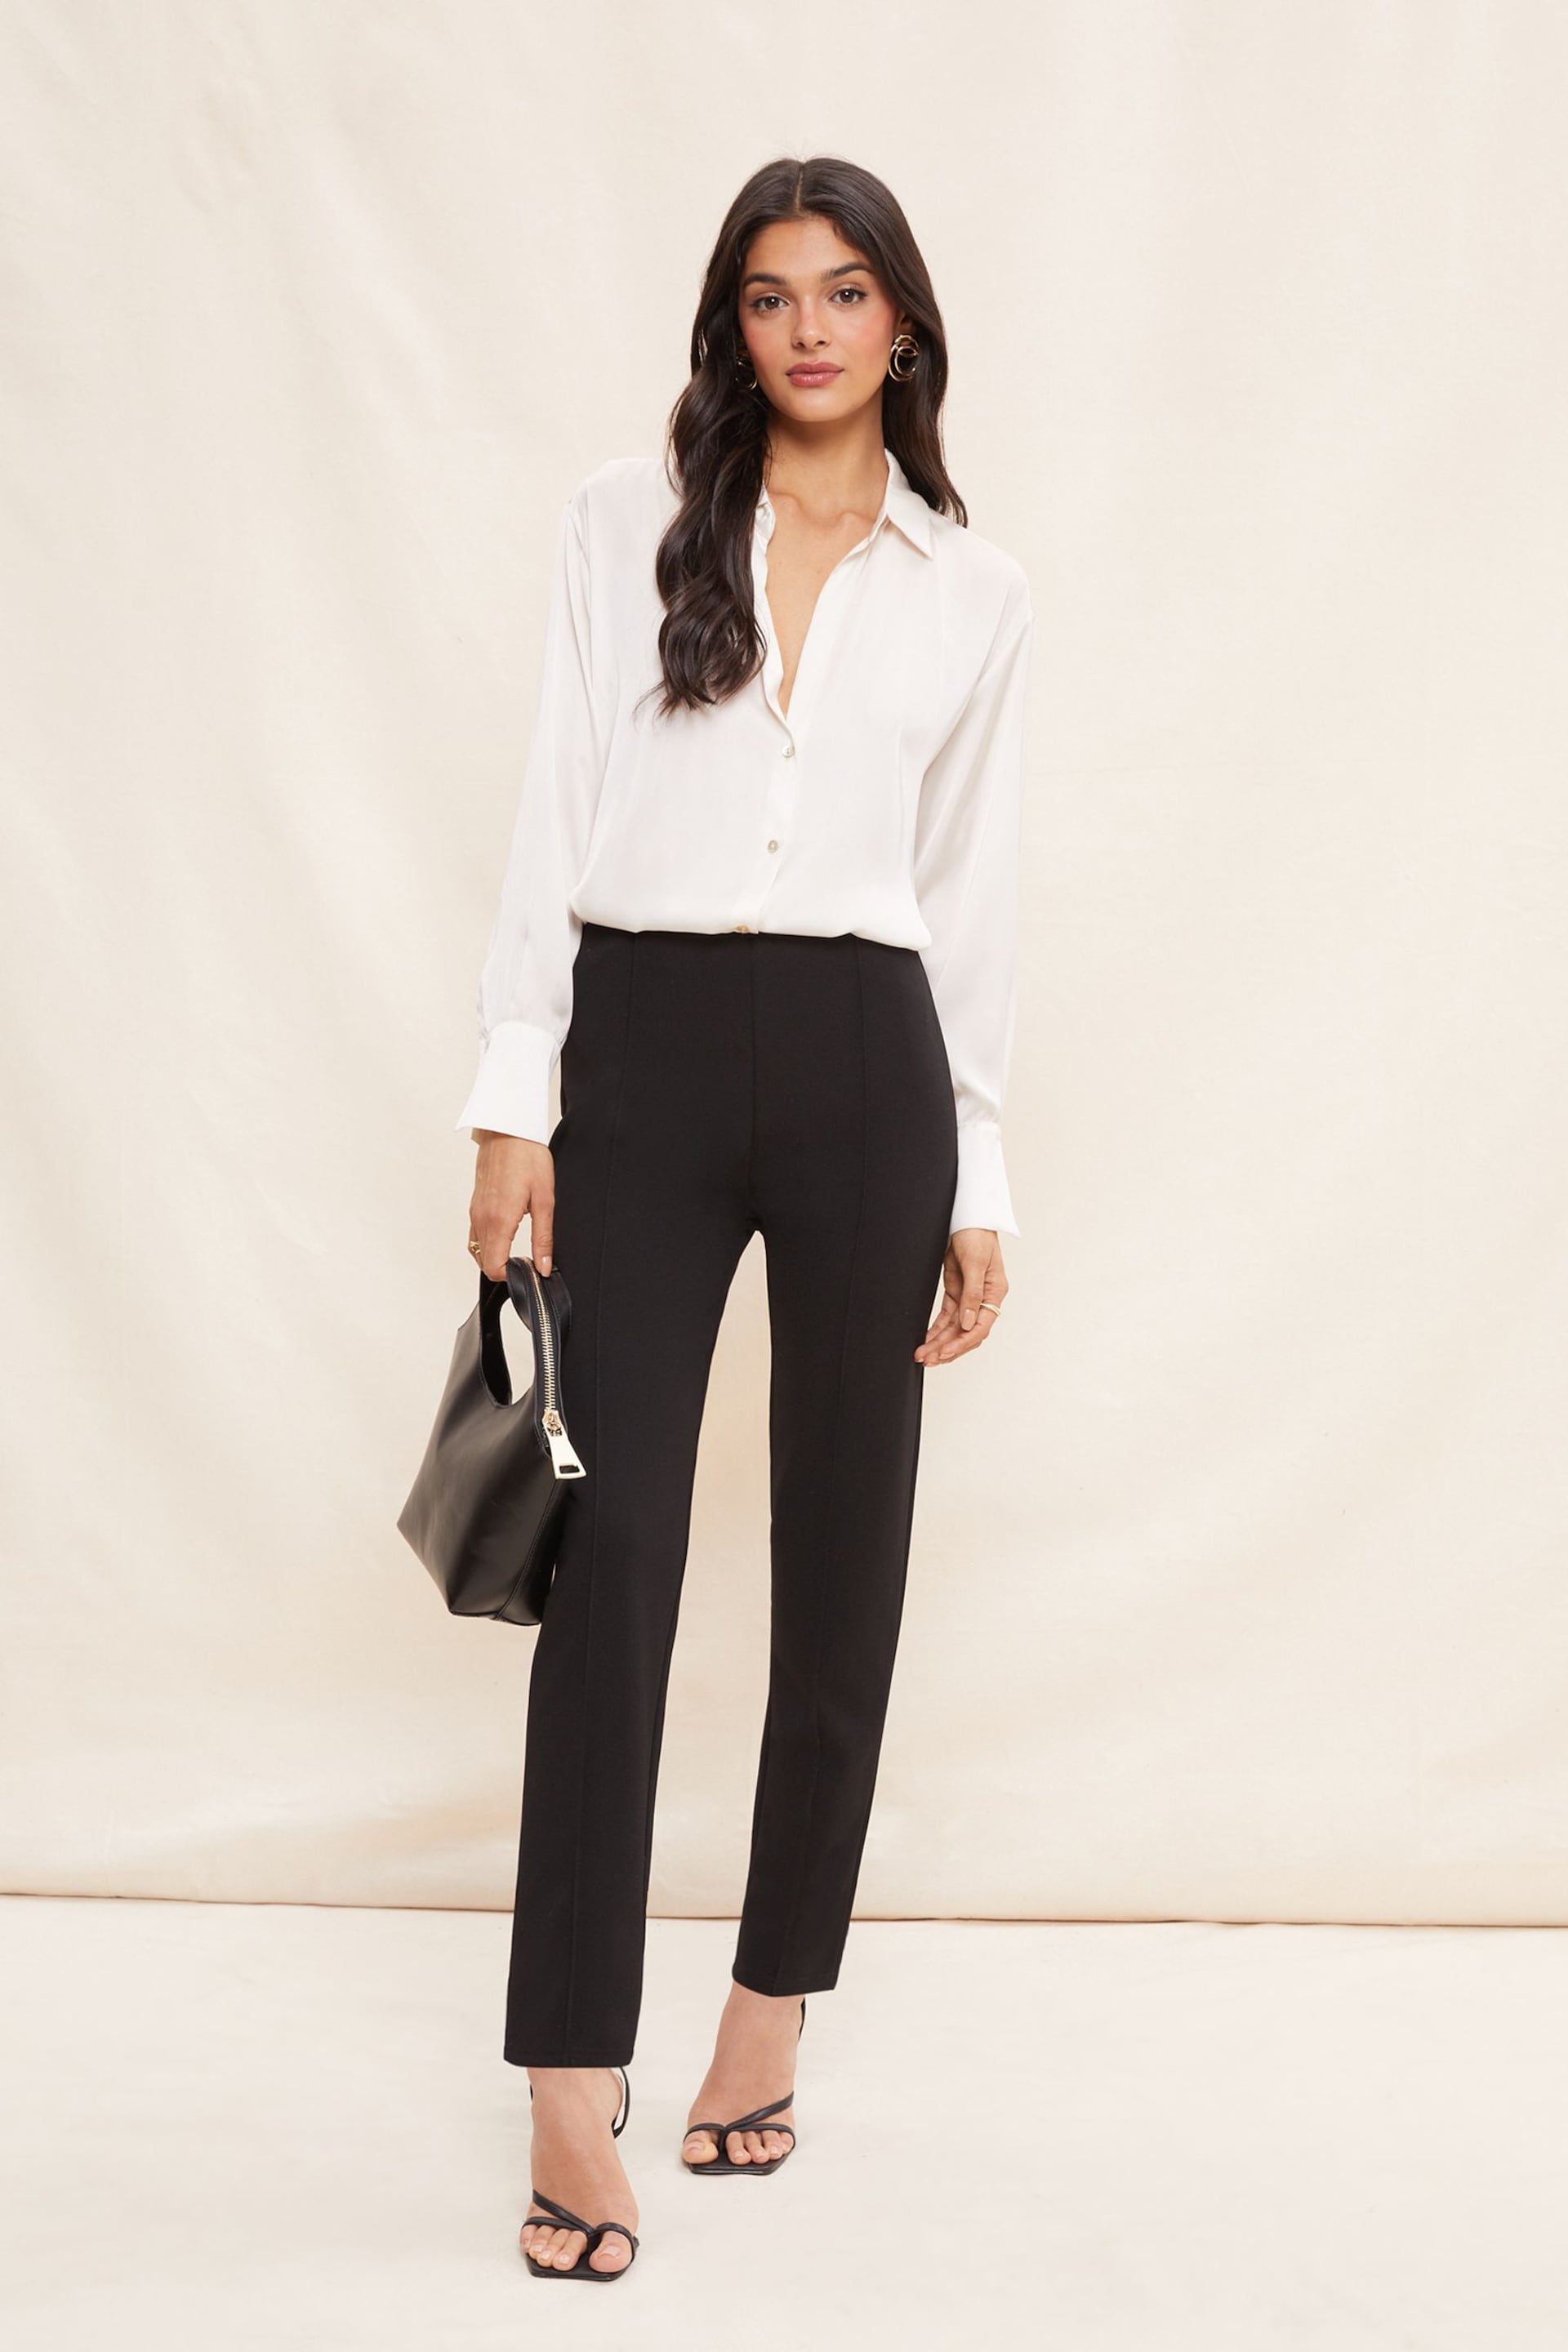 Friends Like These Black Stretch Pintuck Smart Trousers - Image 3 of 4